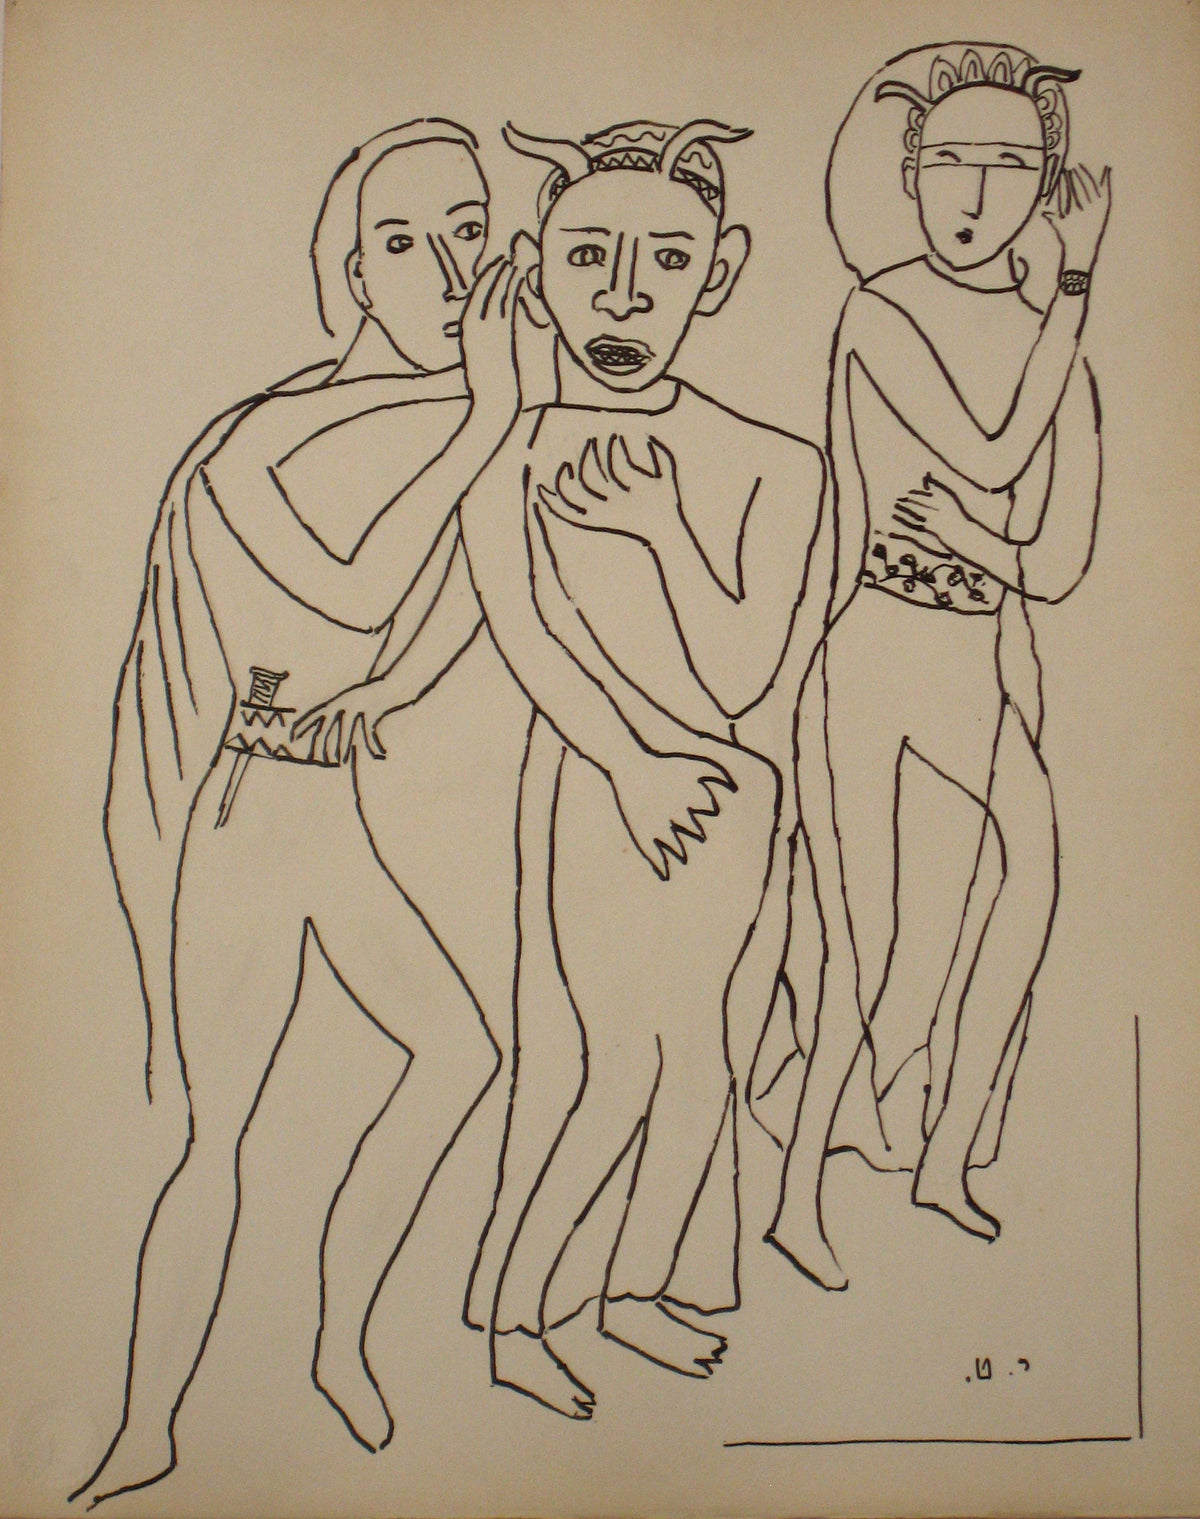 Expressionist Figures &lt;br&gt;Early to Mid 20th Century Ink on Paper &lt;br&gt;&lt;br&gt;#14199